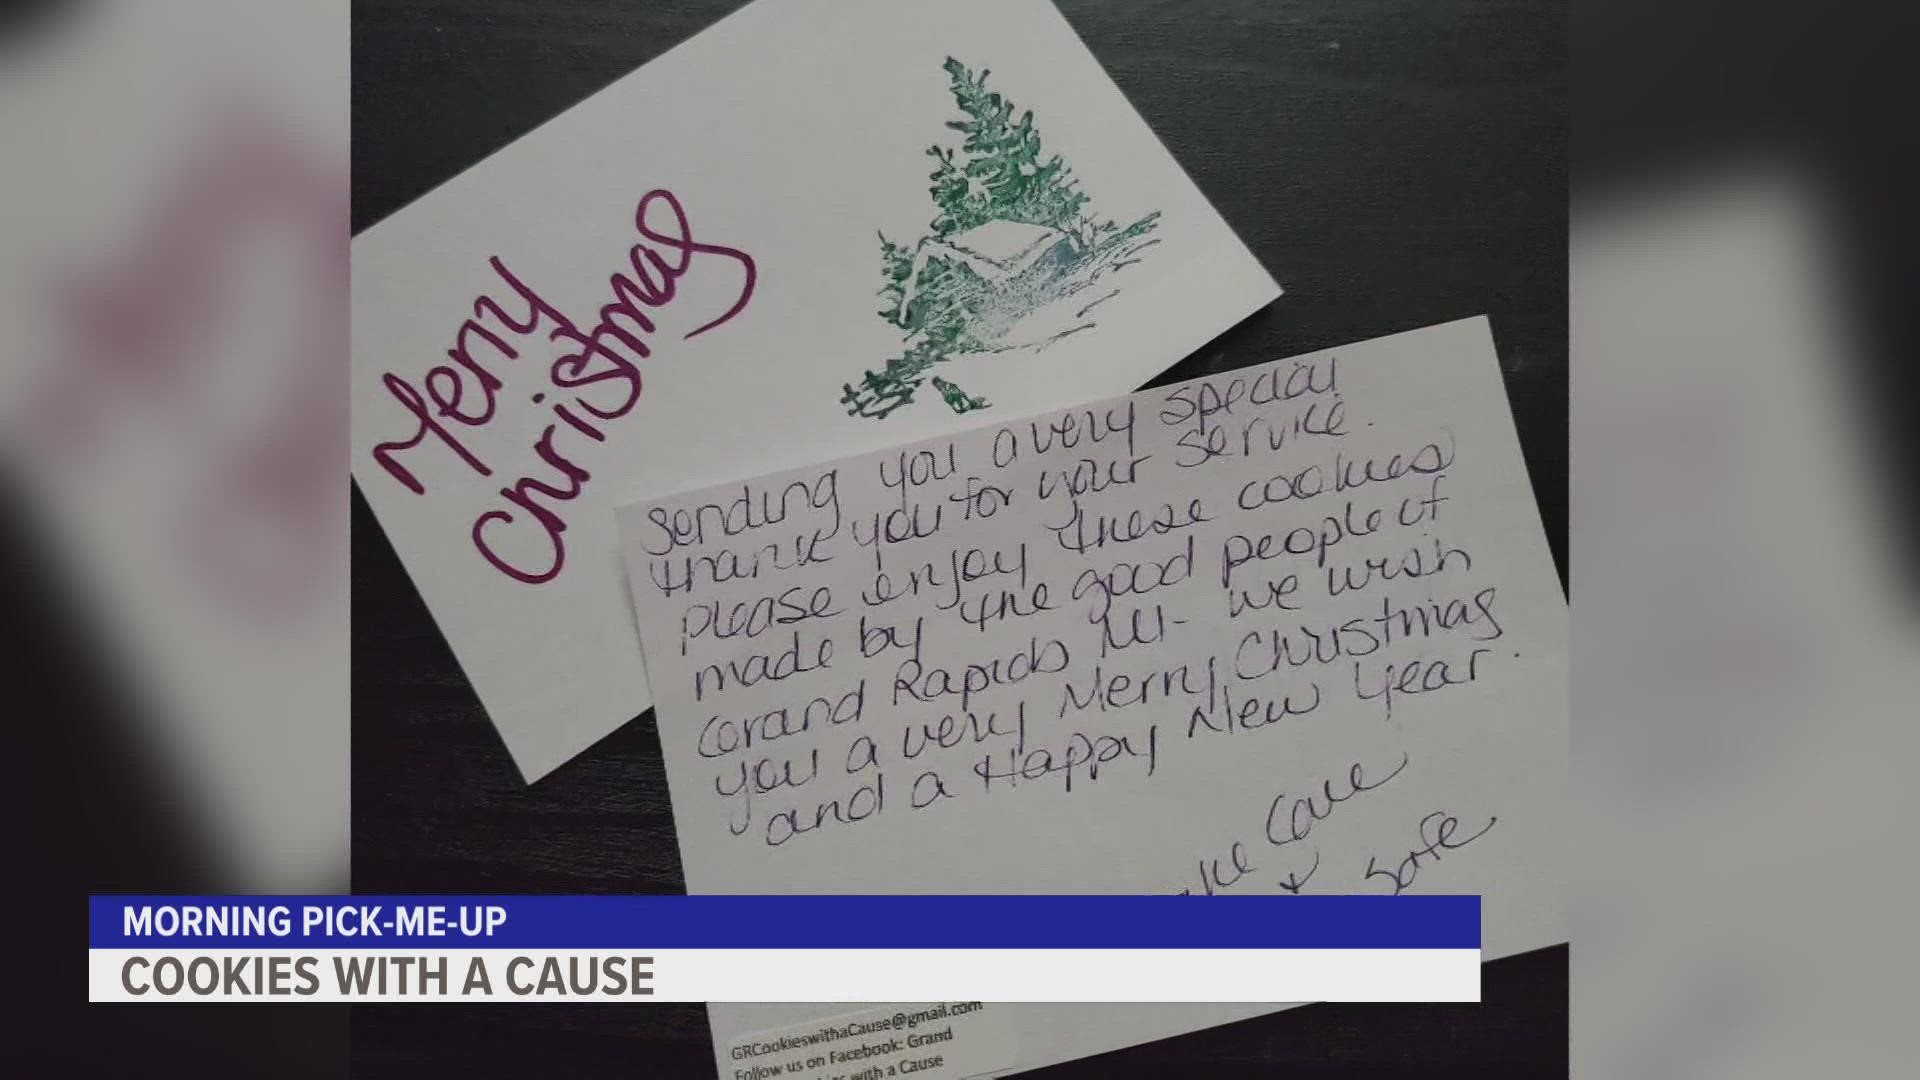 The cookie drive aims to send troops a dozen cookies each, complete with a handwritten Christmas card.